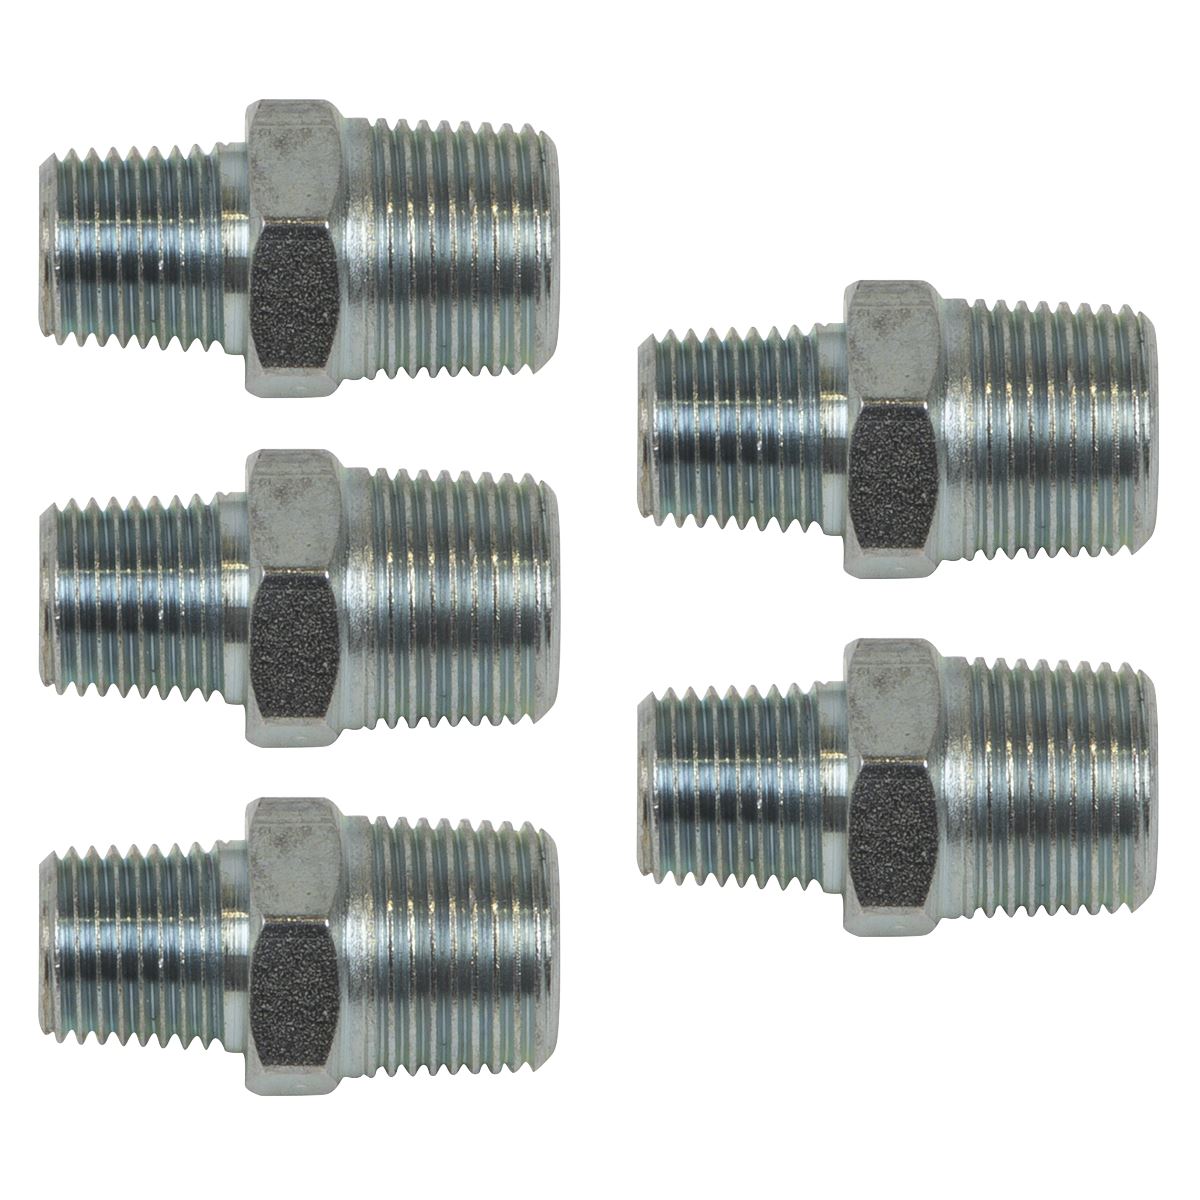 PCL Reducing Union 3/8"BSPT to 1/4"BSPT - Pack of 5